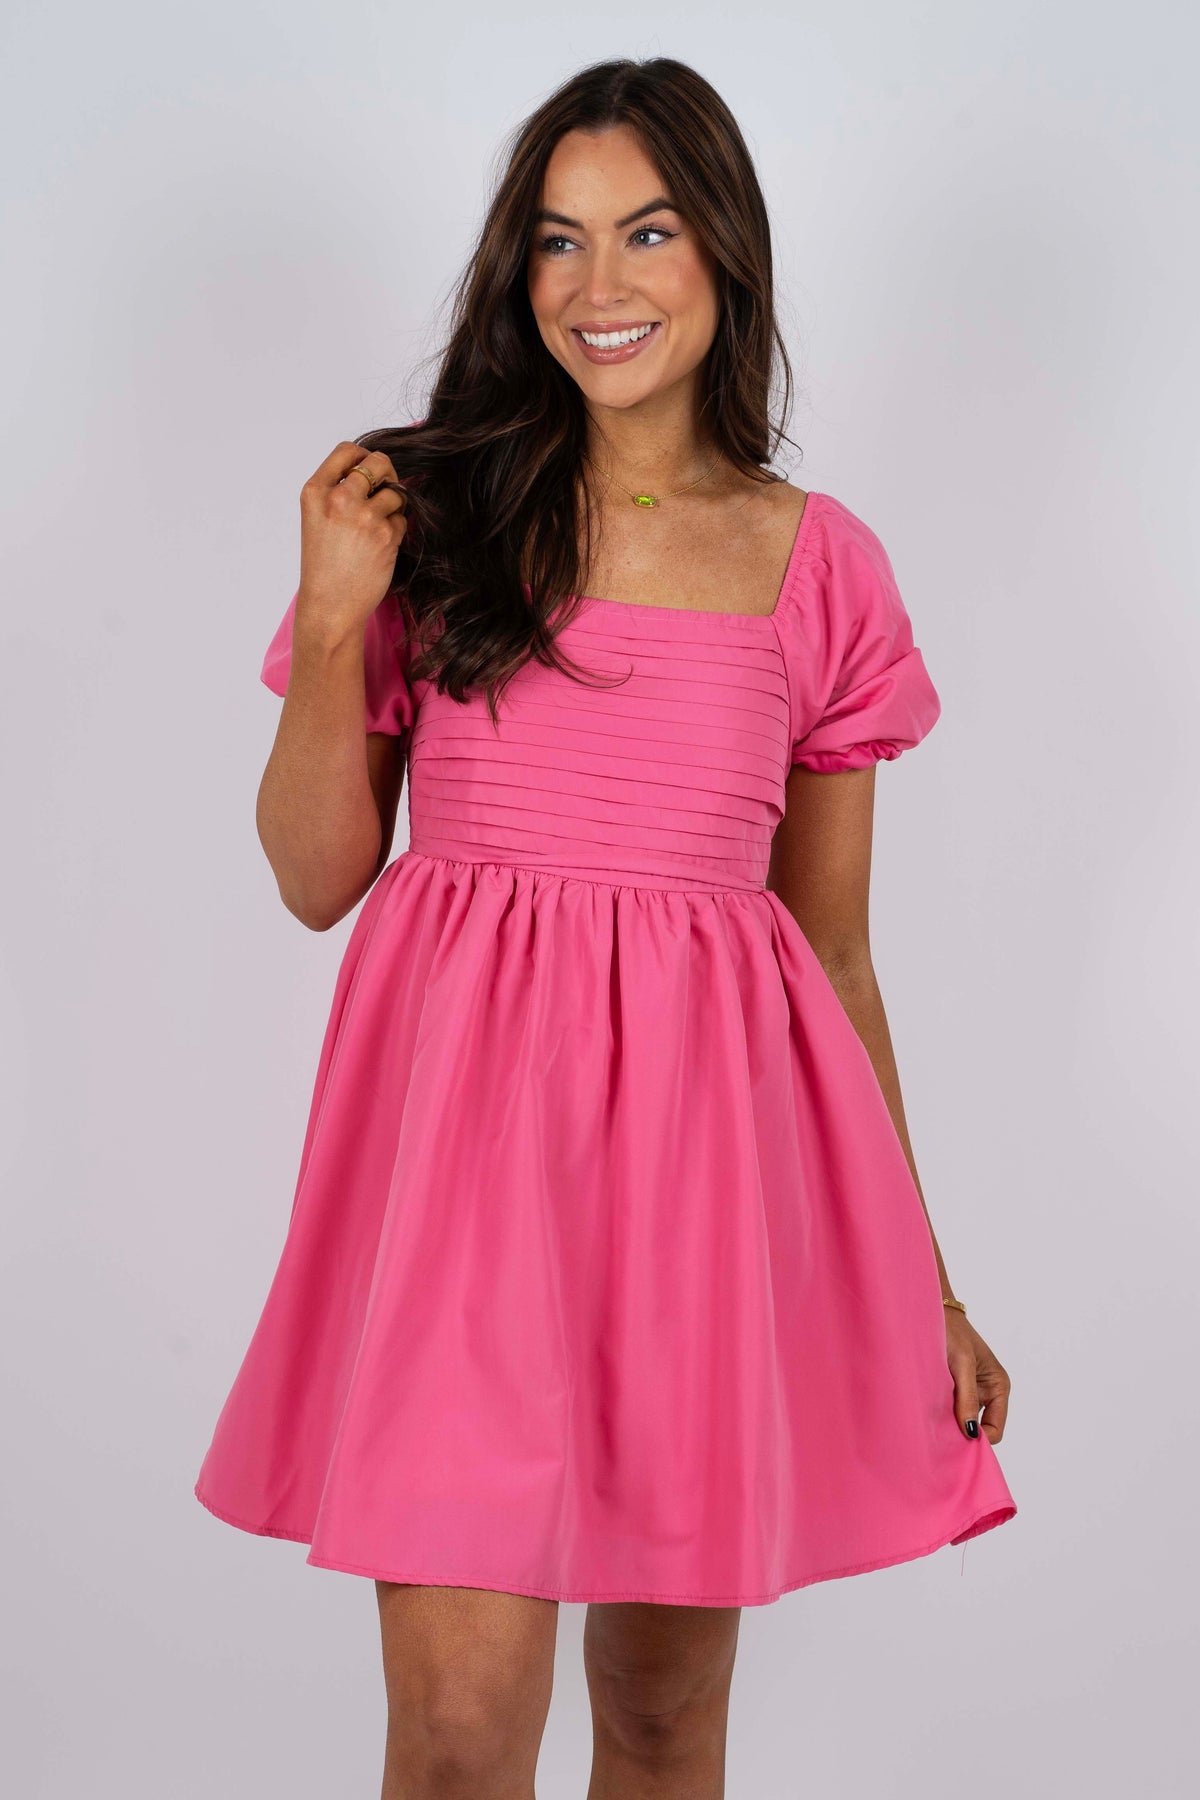 Know The Feeling Dress (Pink)